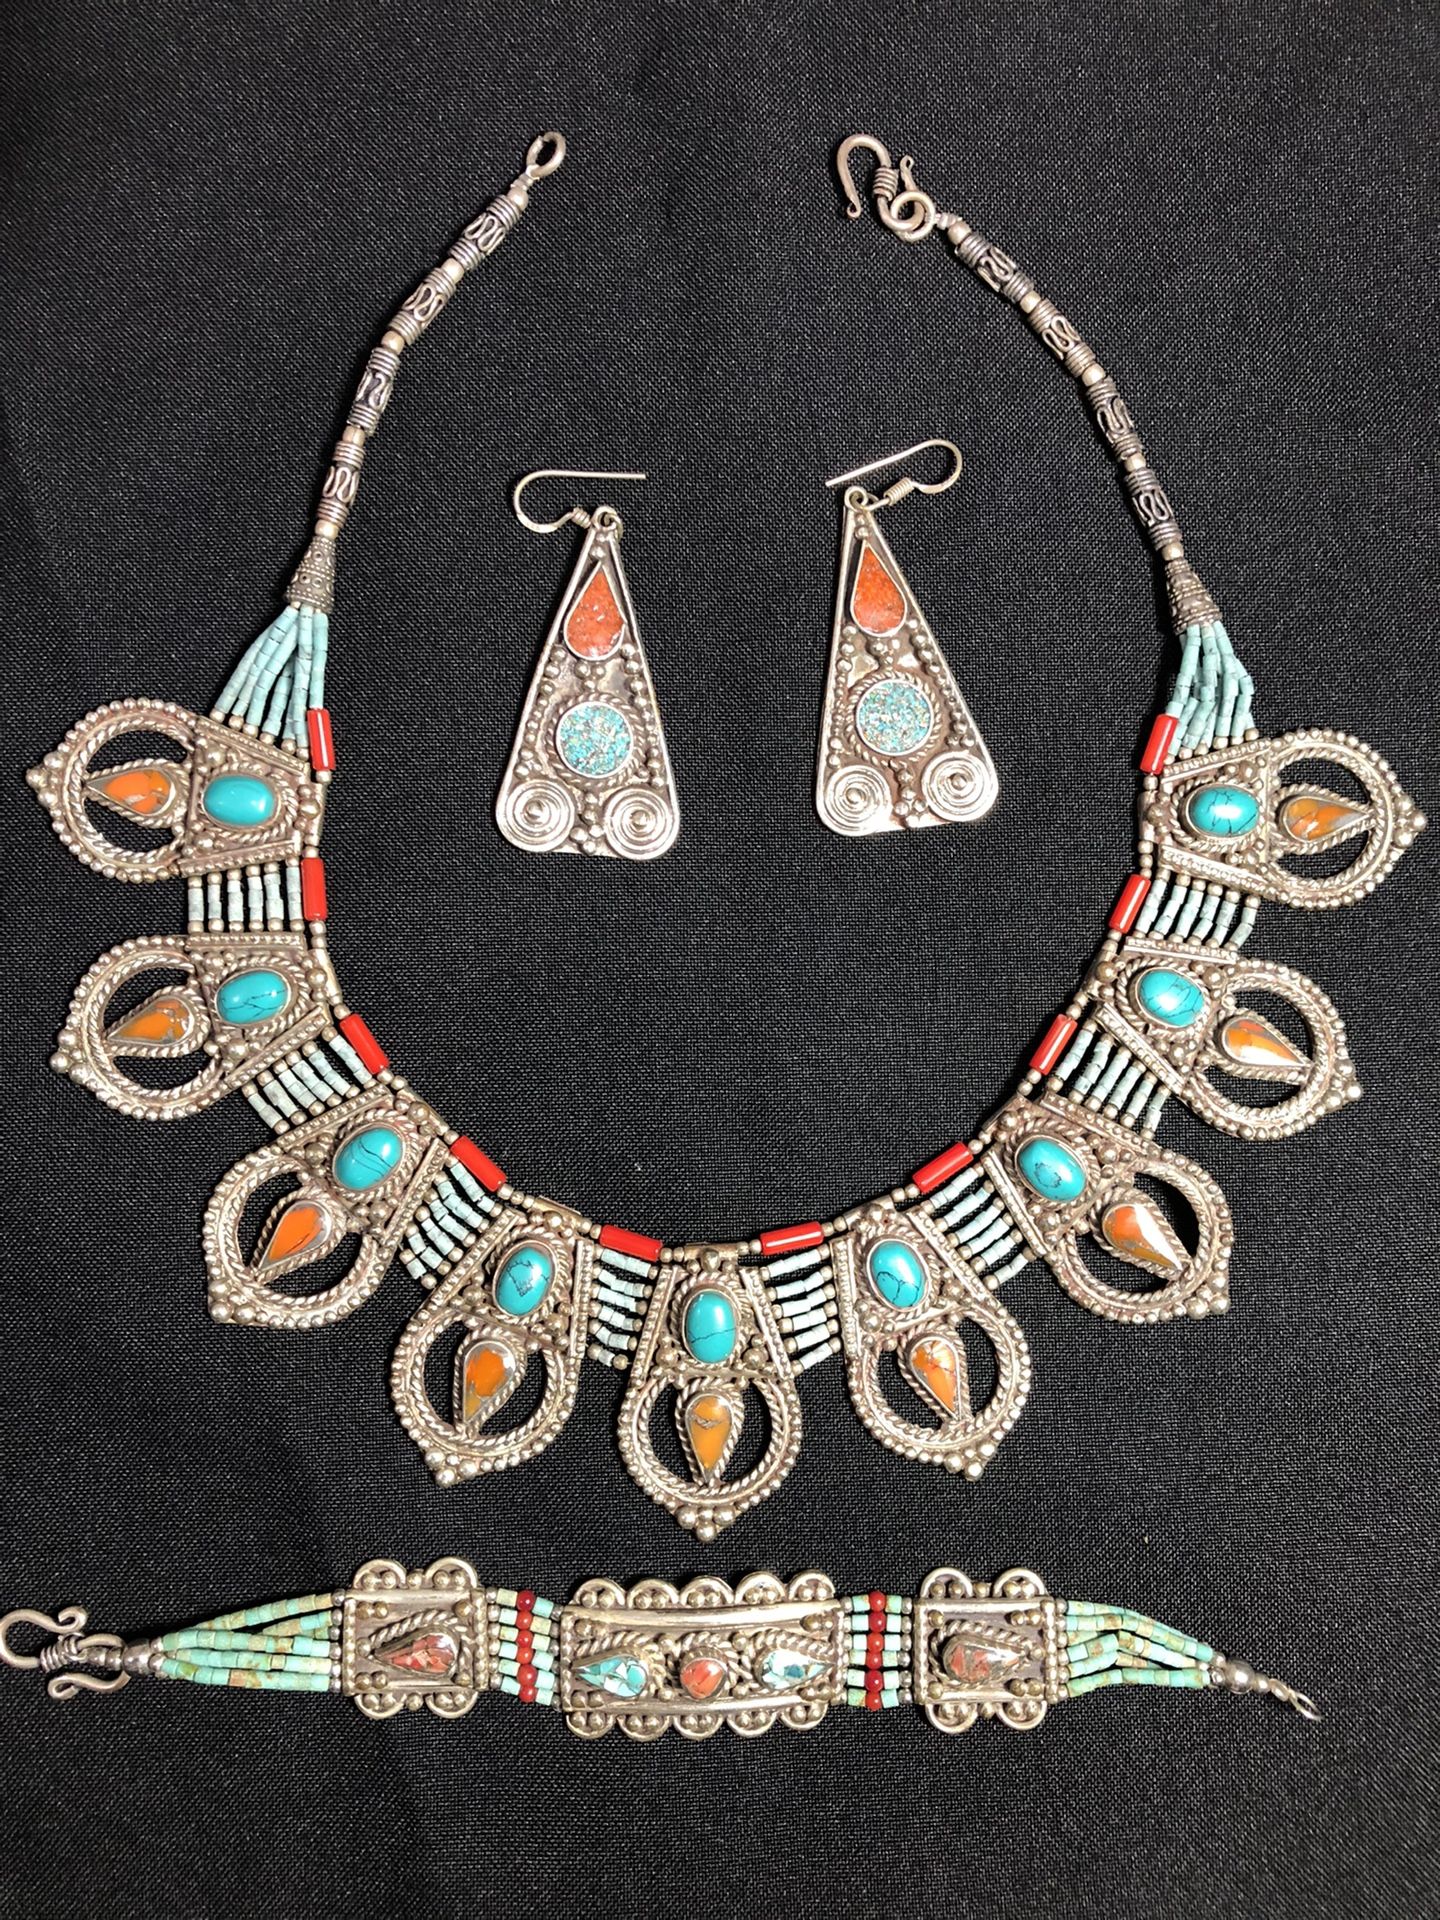 Ancient Egyptian Silver Jewelry Set Reproduction 